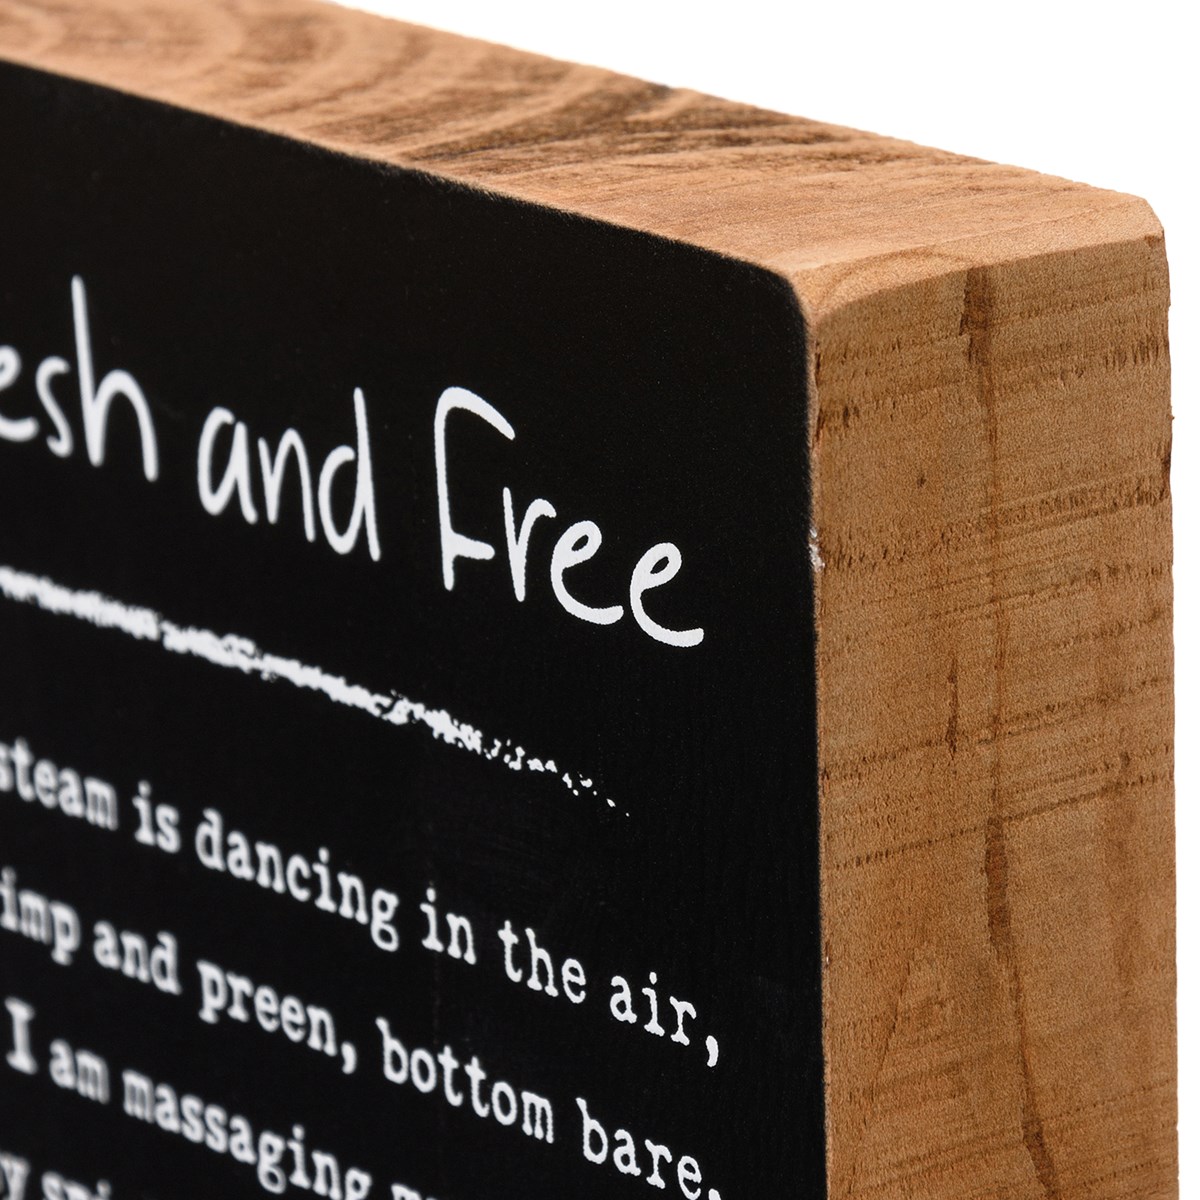 Fresh And Free Block Sign - Wood